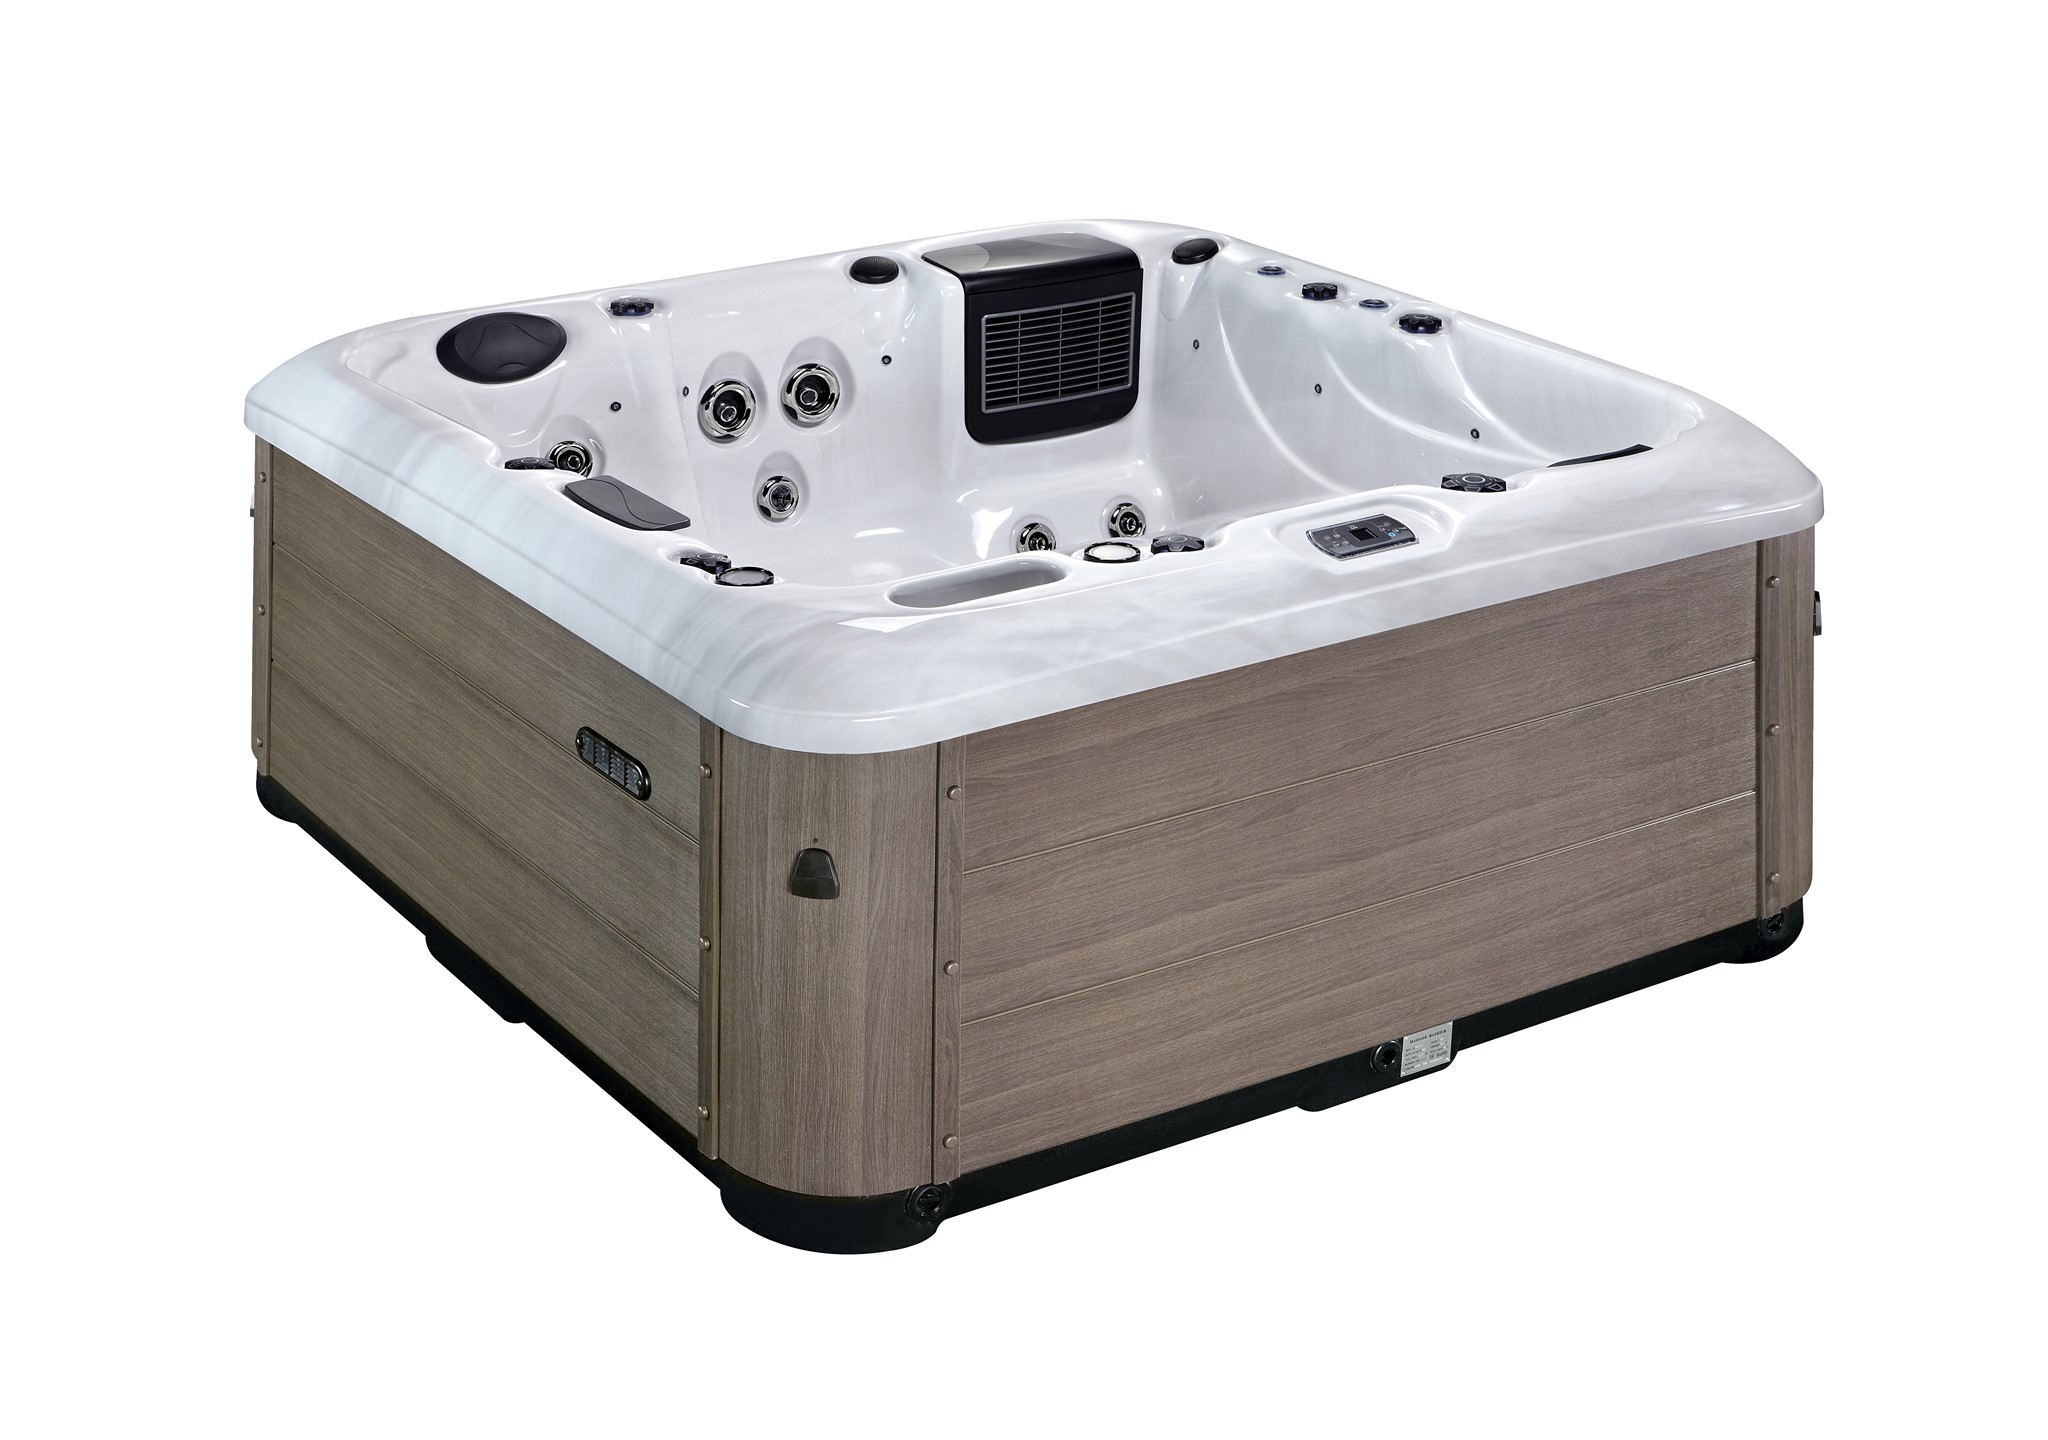 Favells Emperor range Cleopatra spa Quality, luxury and perfect for 4 with 2 sitting + 2 loungers. The Cleopatra hot tub... » Outdoor Furniture Fuengirola, Costa Del Sol, Spain